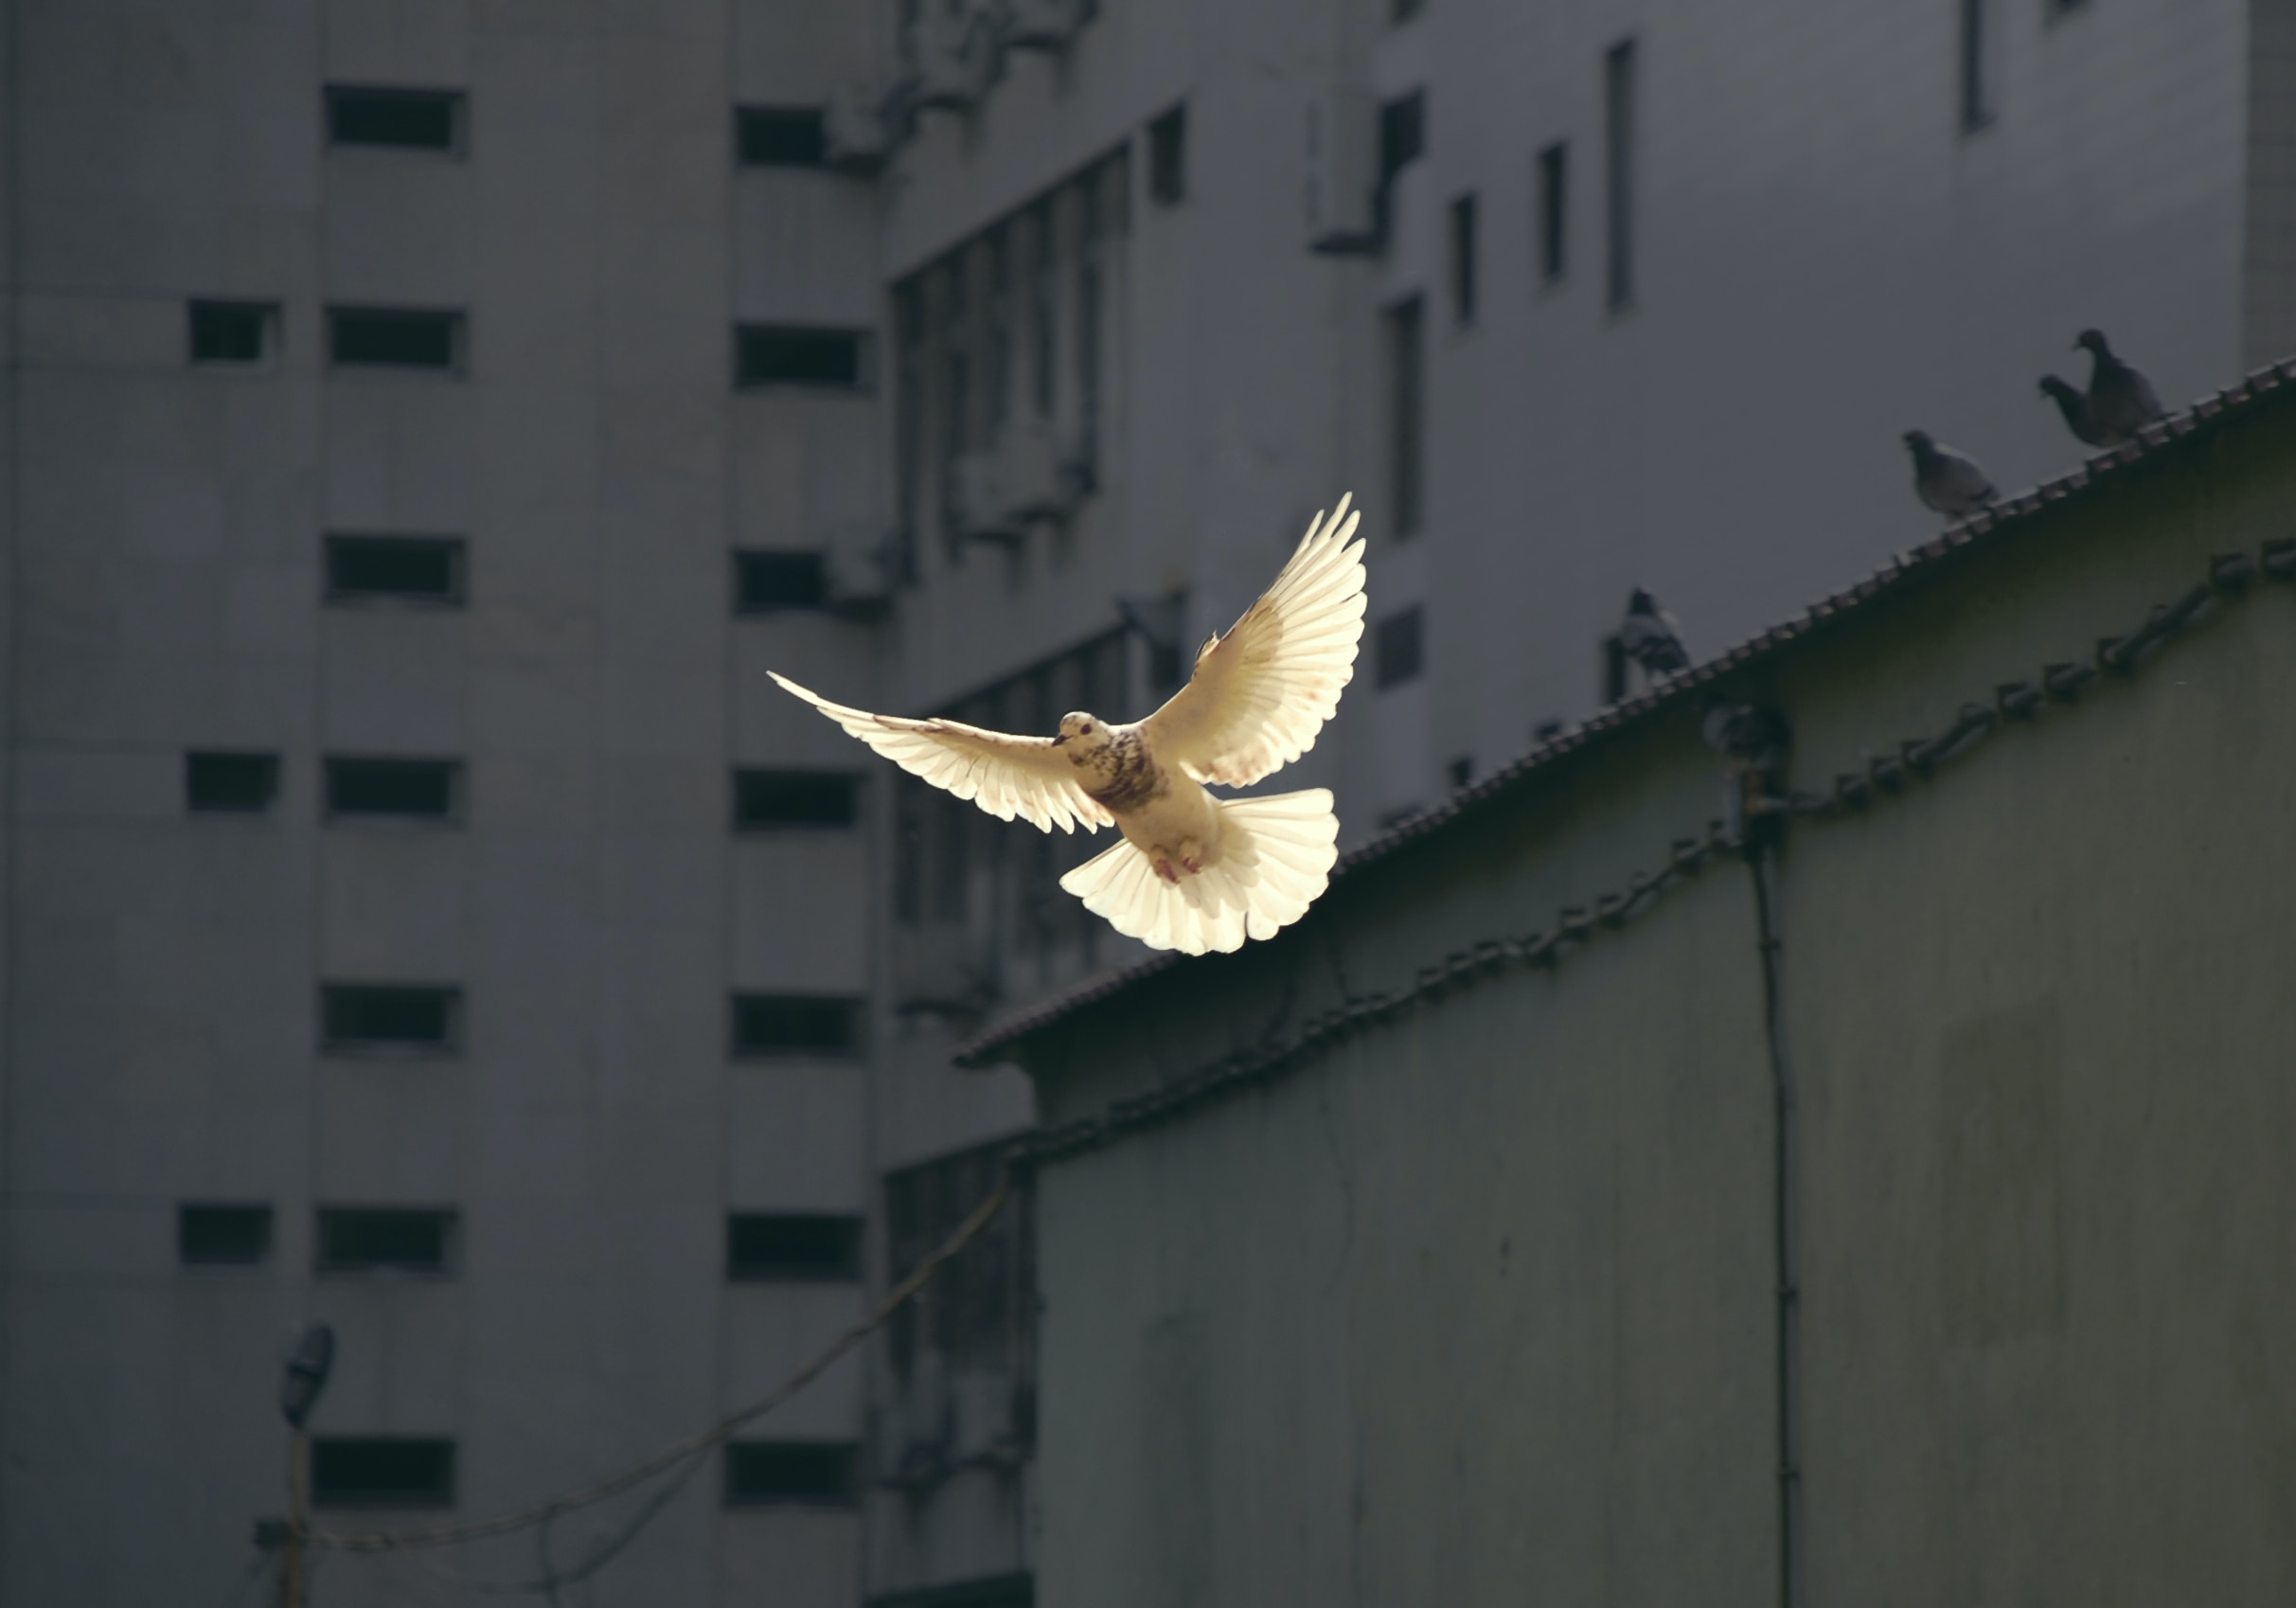 A dove flies in front of a building.